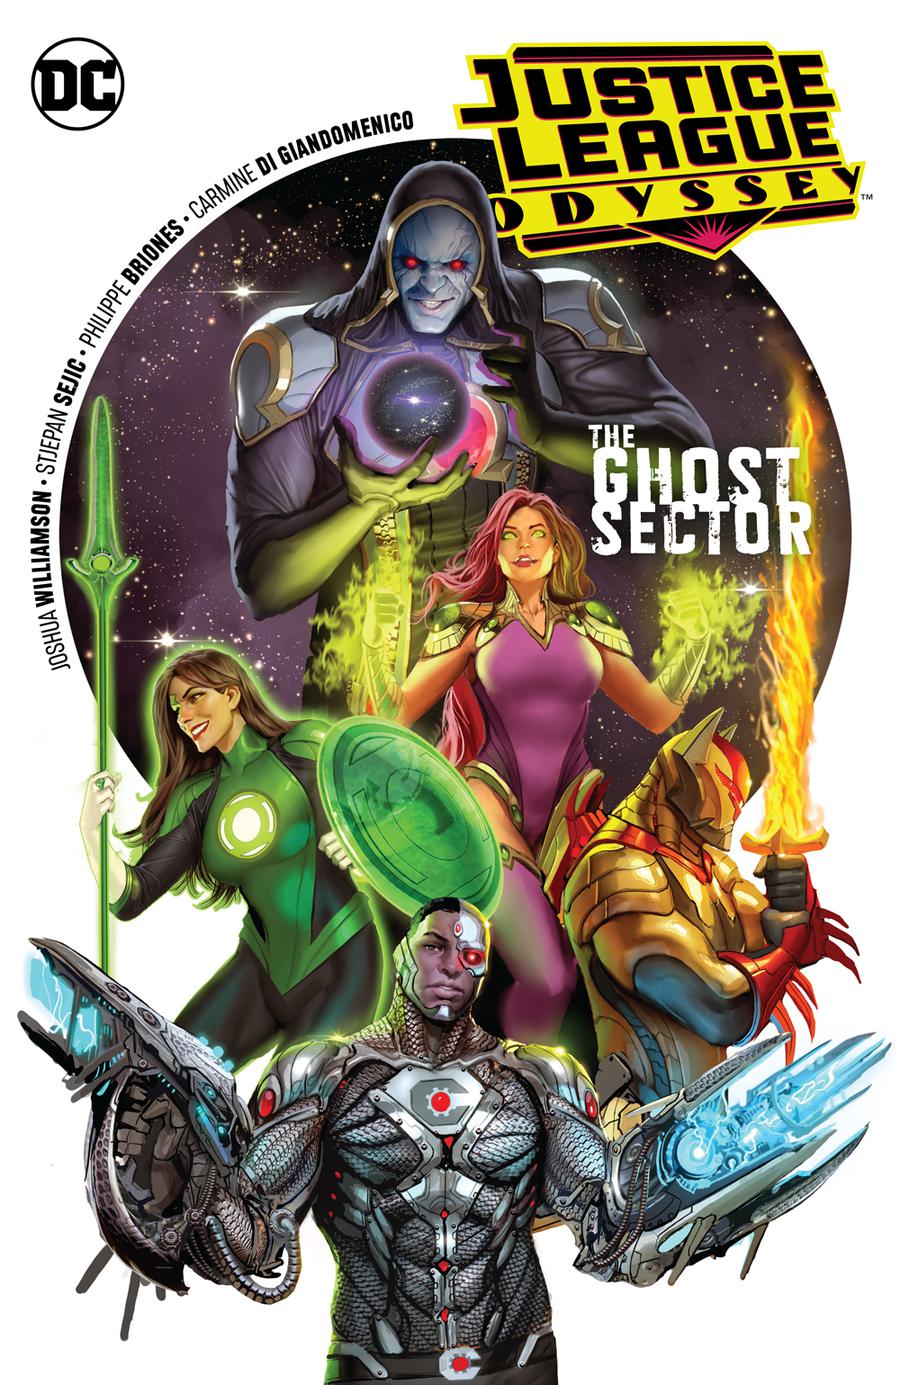 Justice League Odyssey Vol 1 The Ghost Sector TP